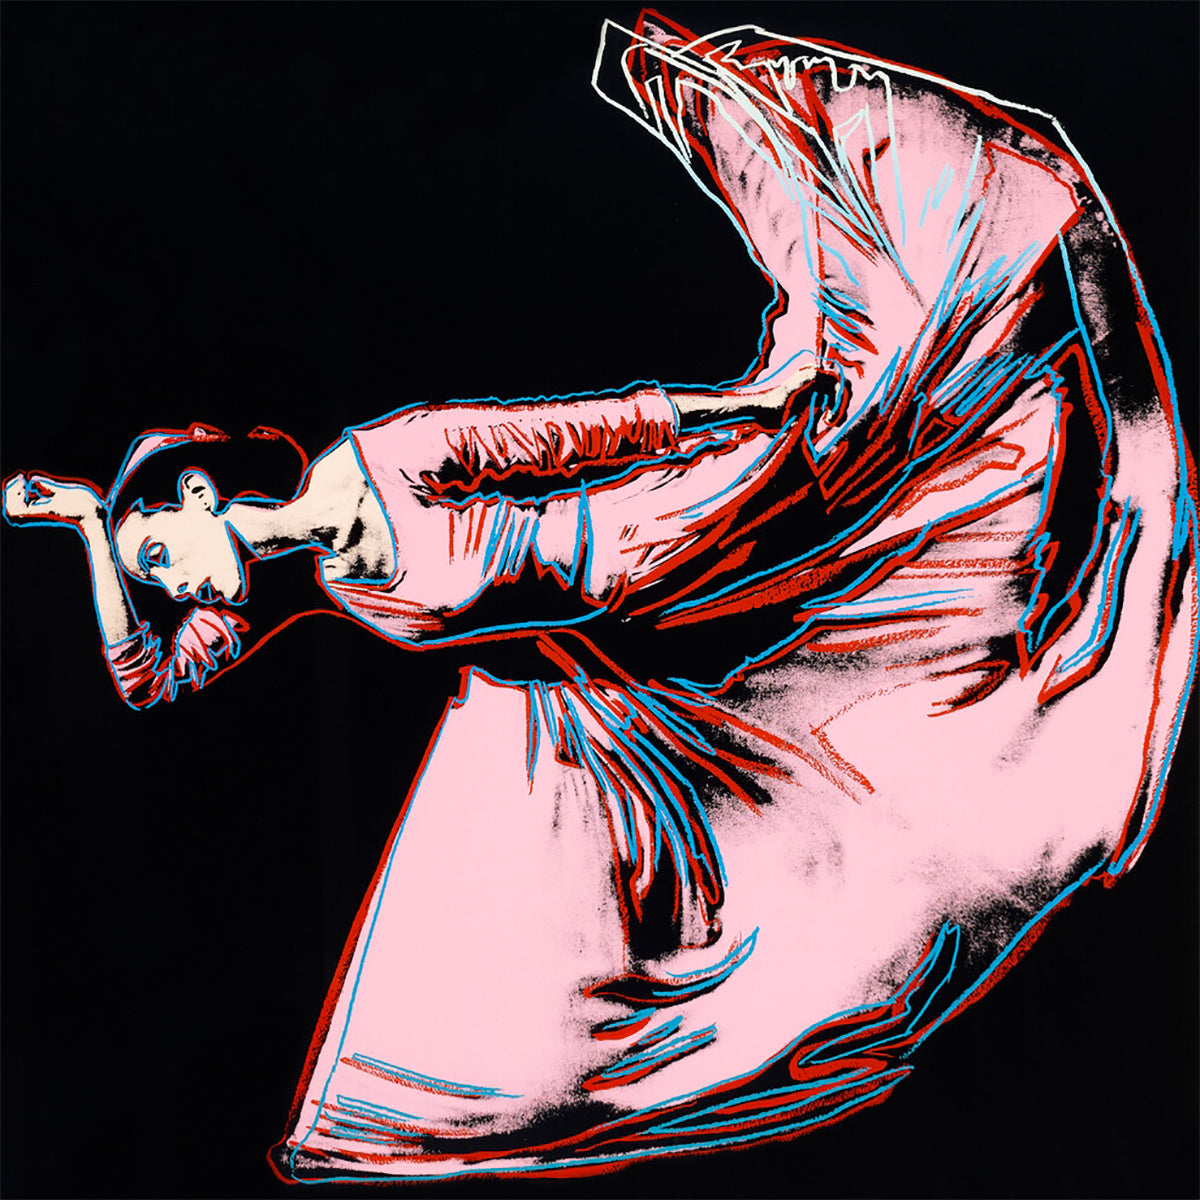 ABOUT EDWARD KURSTAK Andy Warhol  from the Portfolio “Martha Graham”, Letter to the World (The Kick), FS II 389